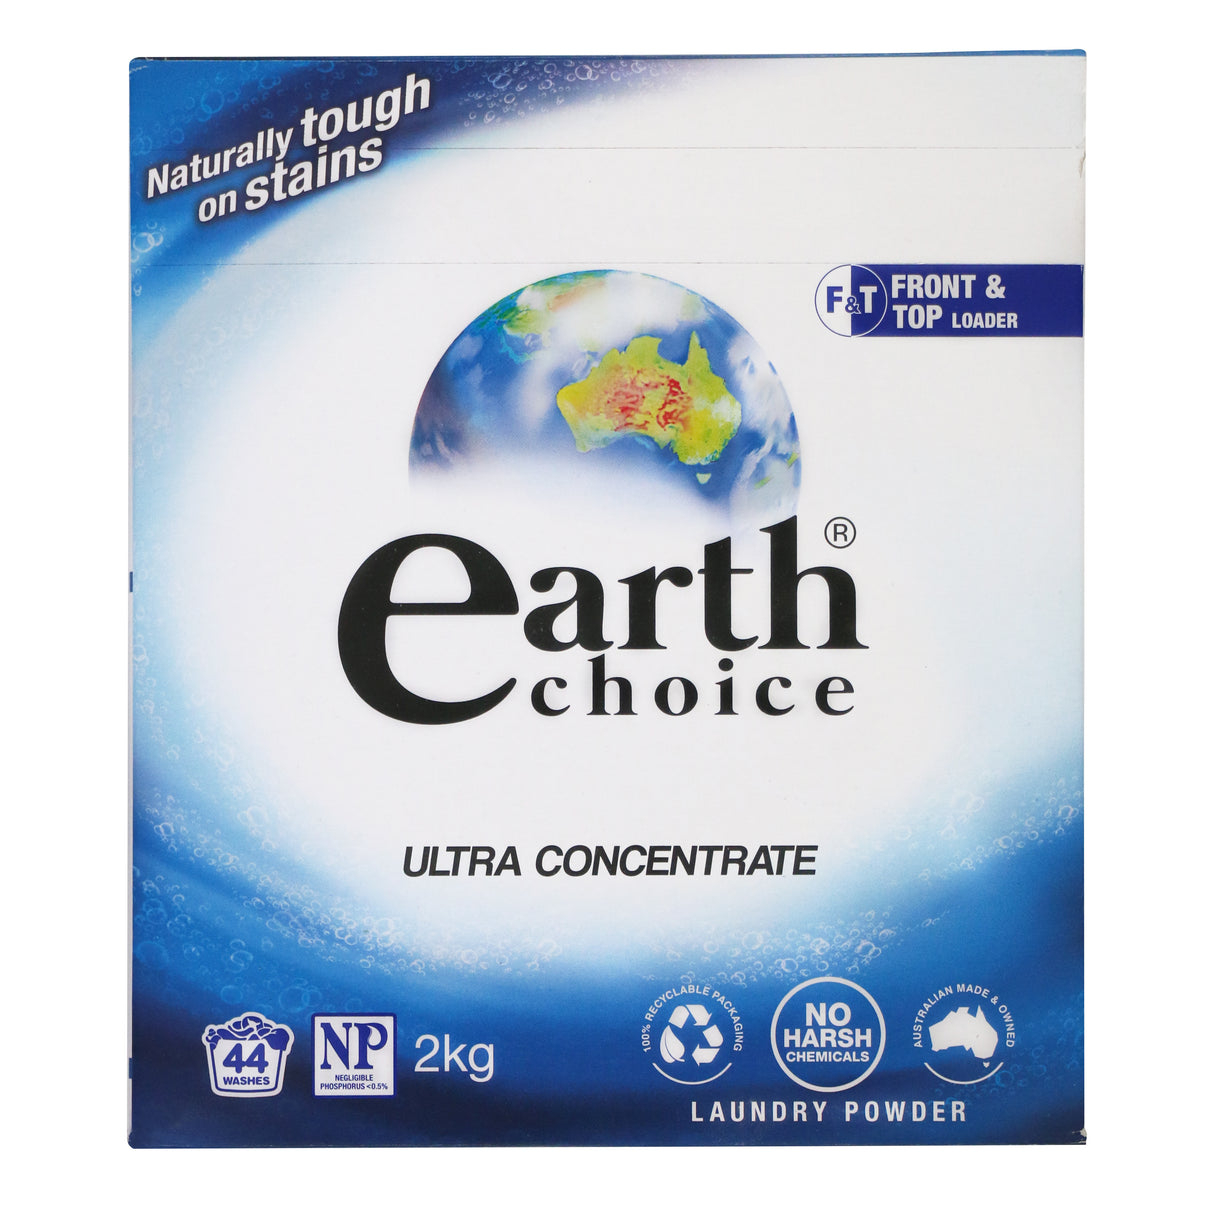 Earth Choice Laundry Powder Top & Front Loader 2kg